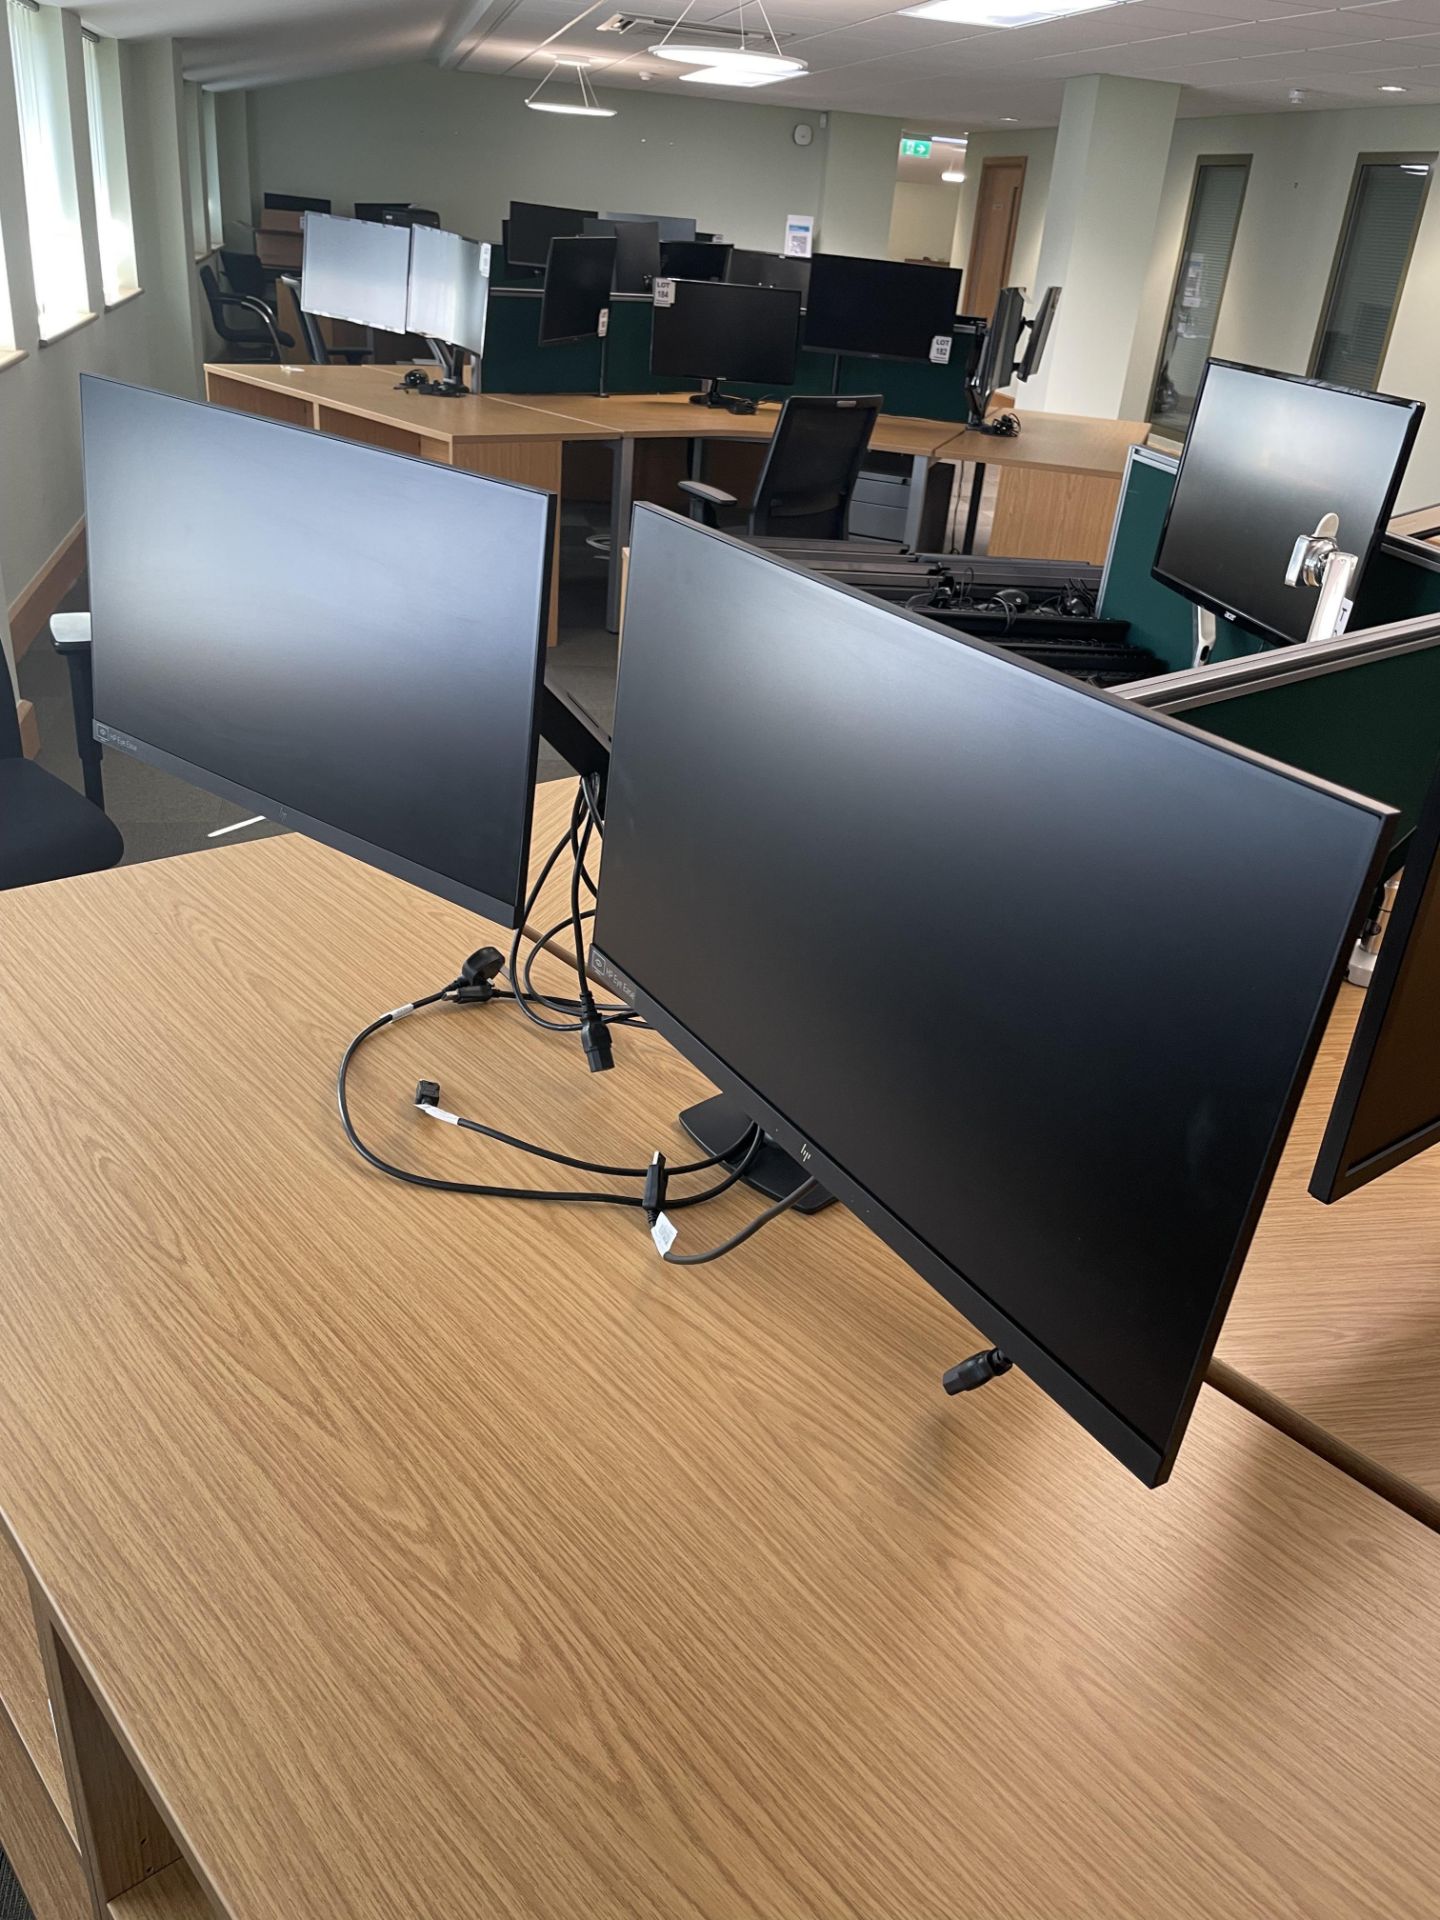 2 x HP 24" screens with twin arm desk stand